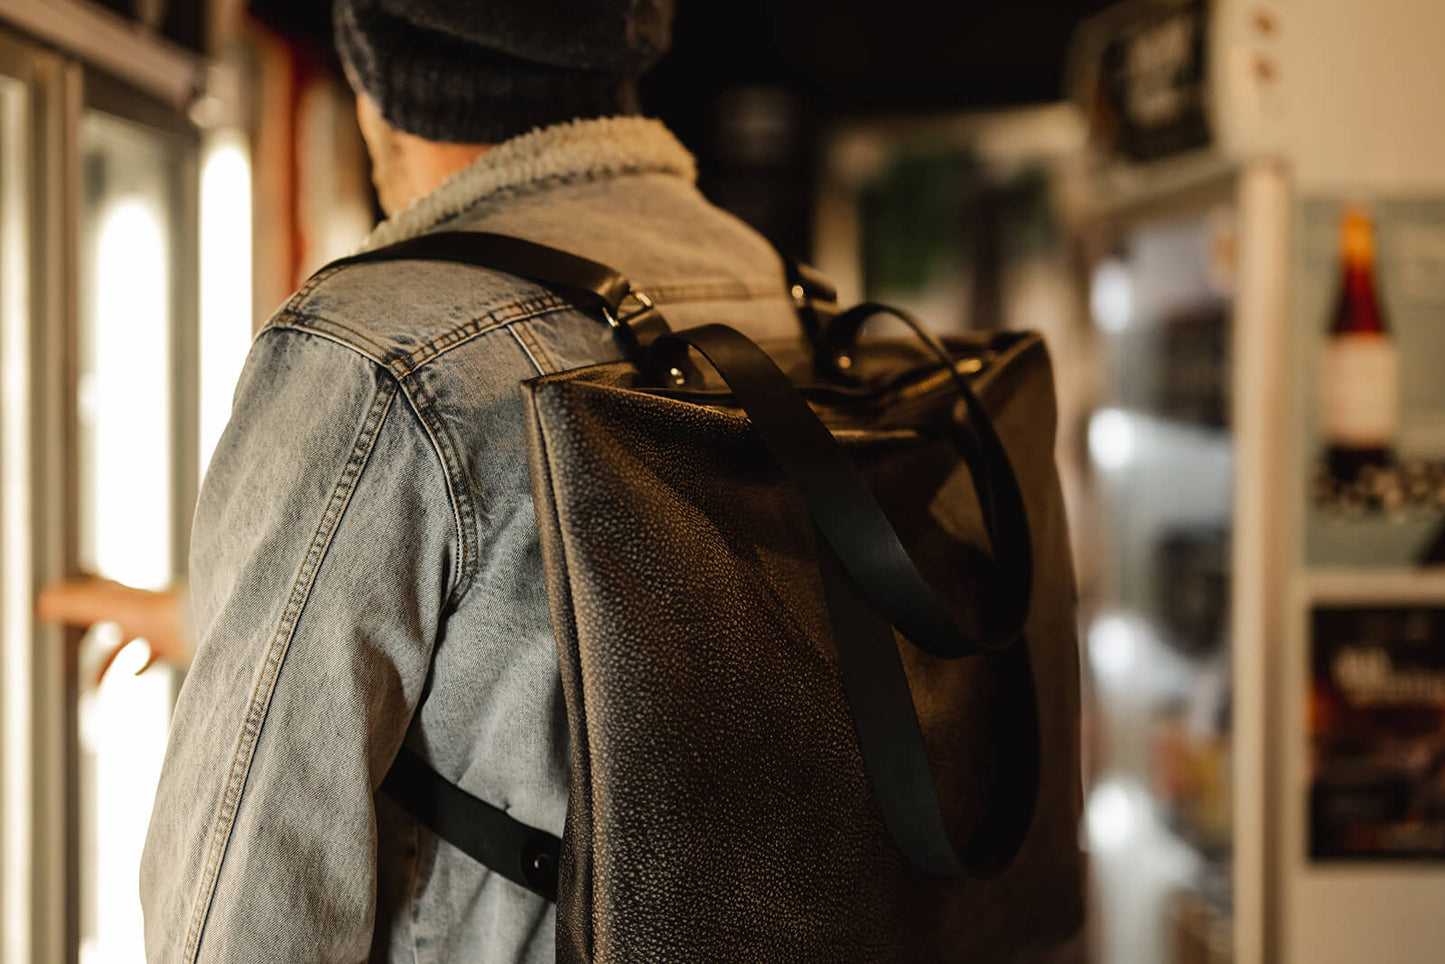 Man opening fridge in bottle shop wearing denim jacket and grey backpack with black straps. The bag is the Ella Jackson Two-tone Grey Leather Backpack & Tote